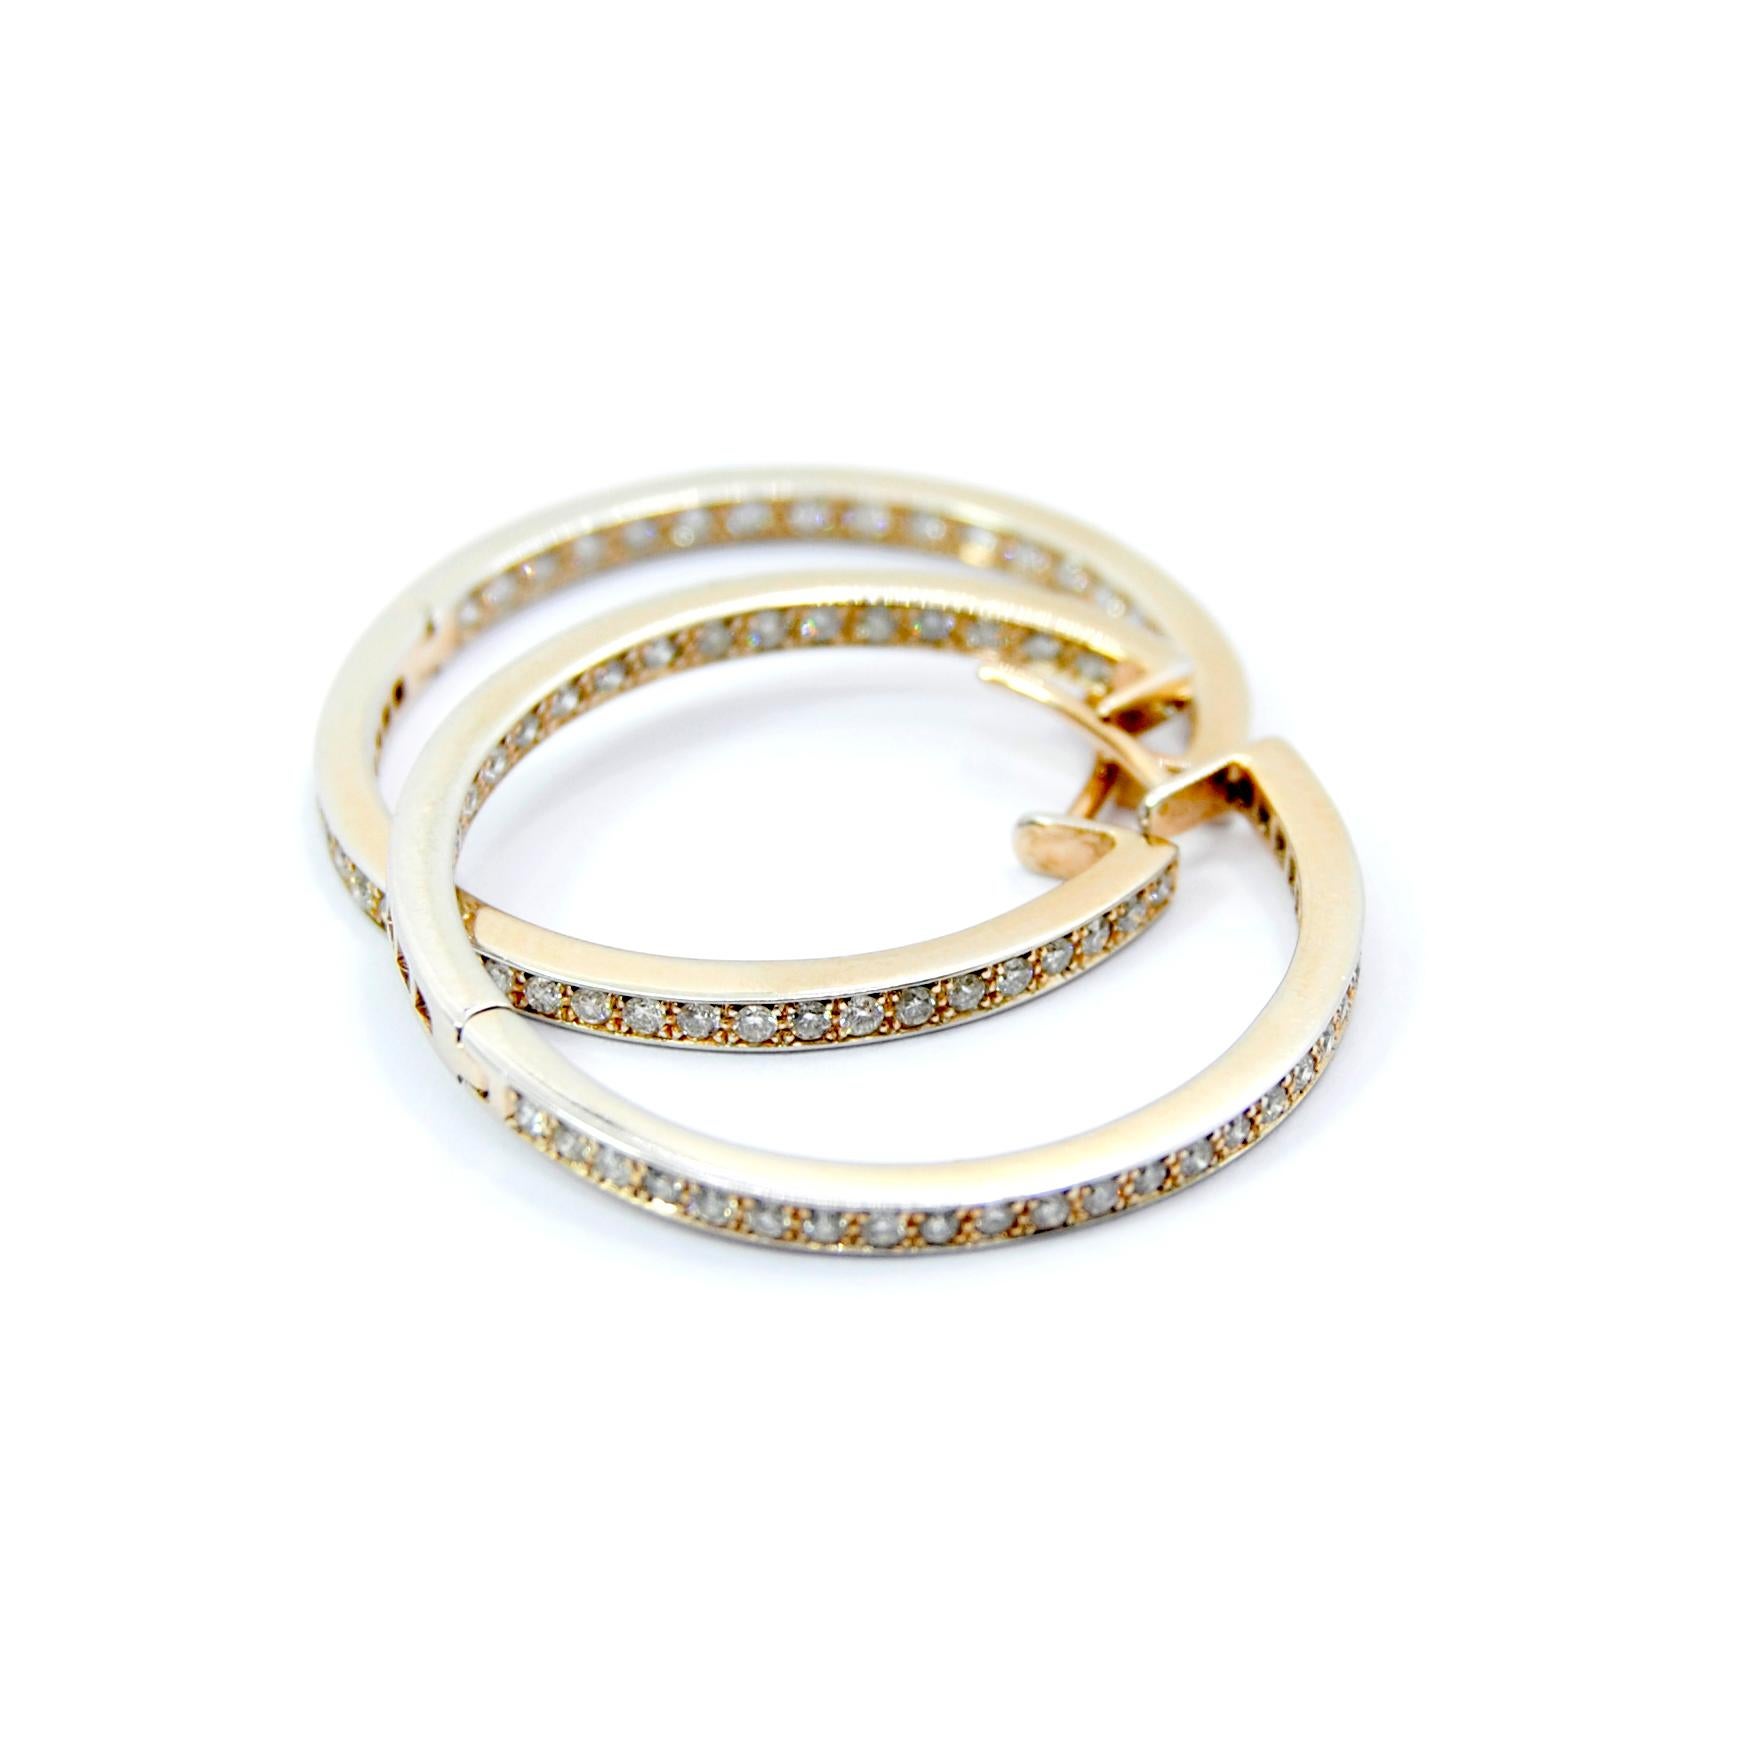 Women's Diamond Hoops Earring in white and yellow 18kt gold and 1.60ct of white diamonds For Sale